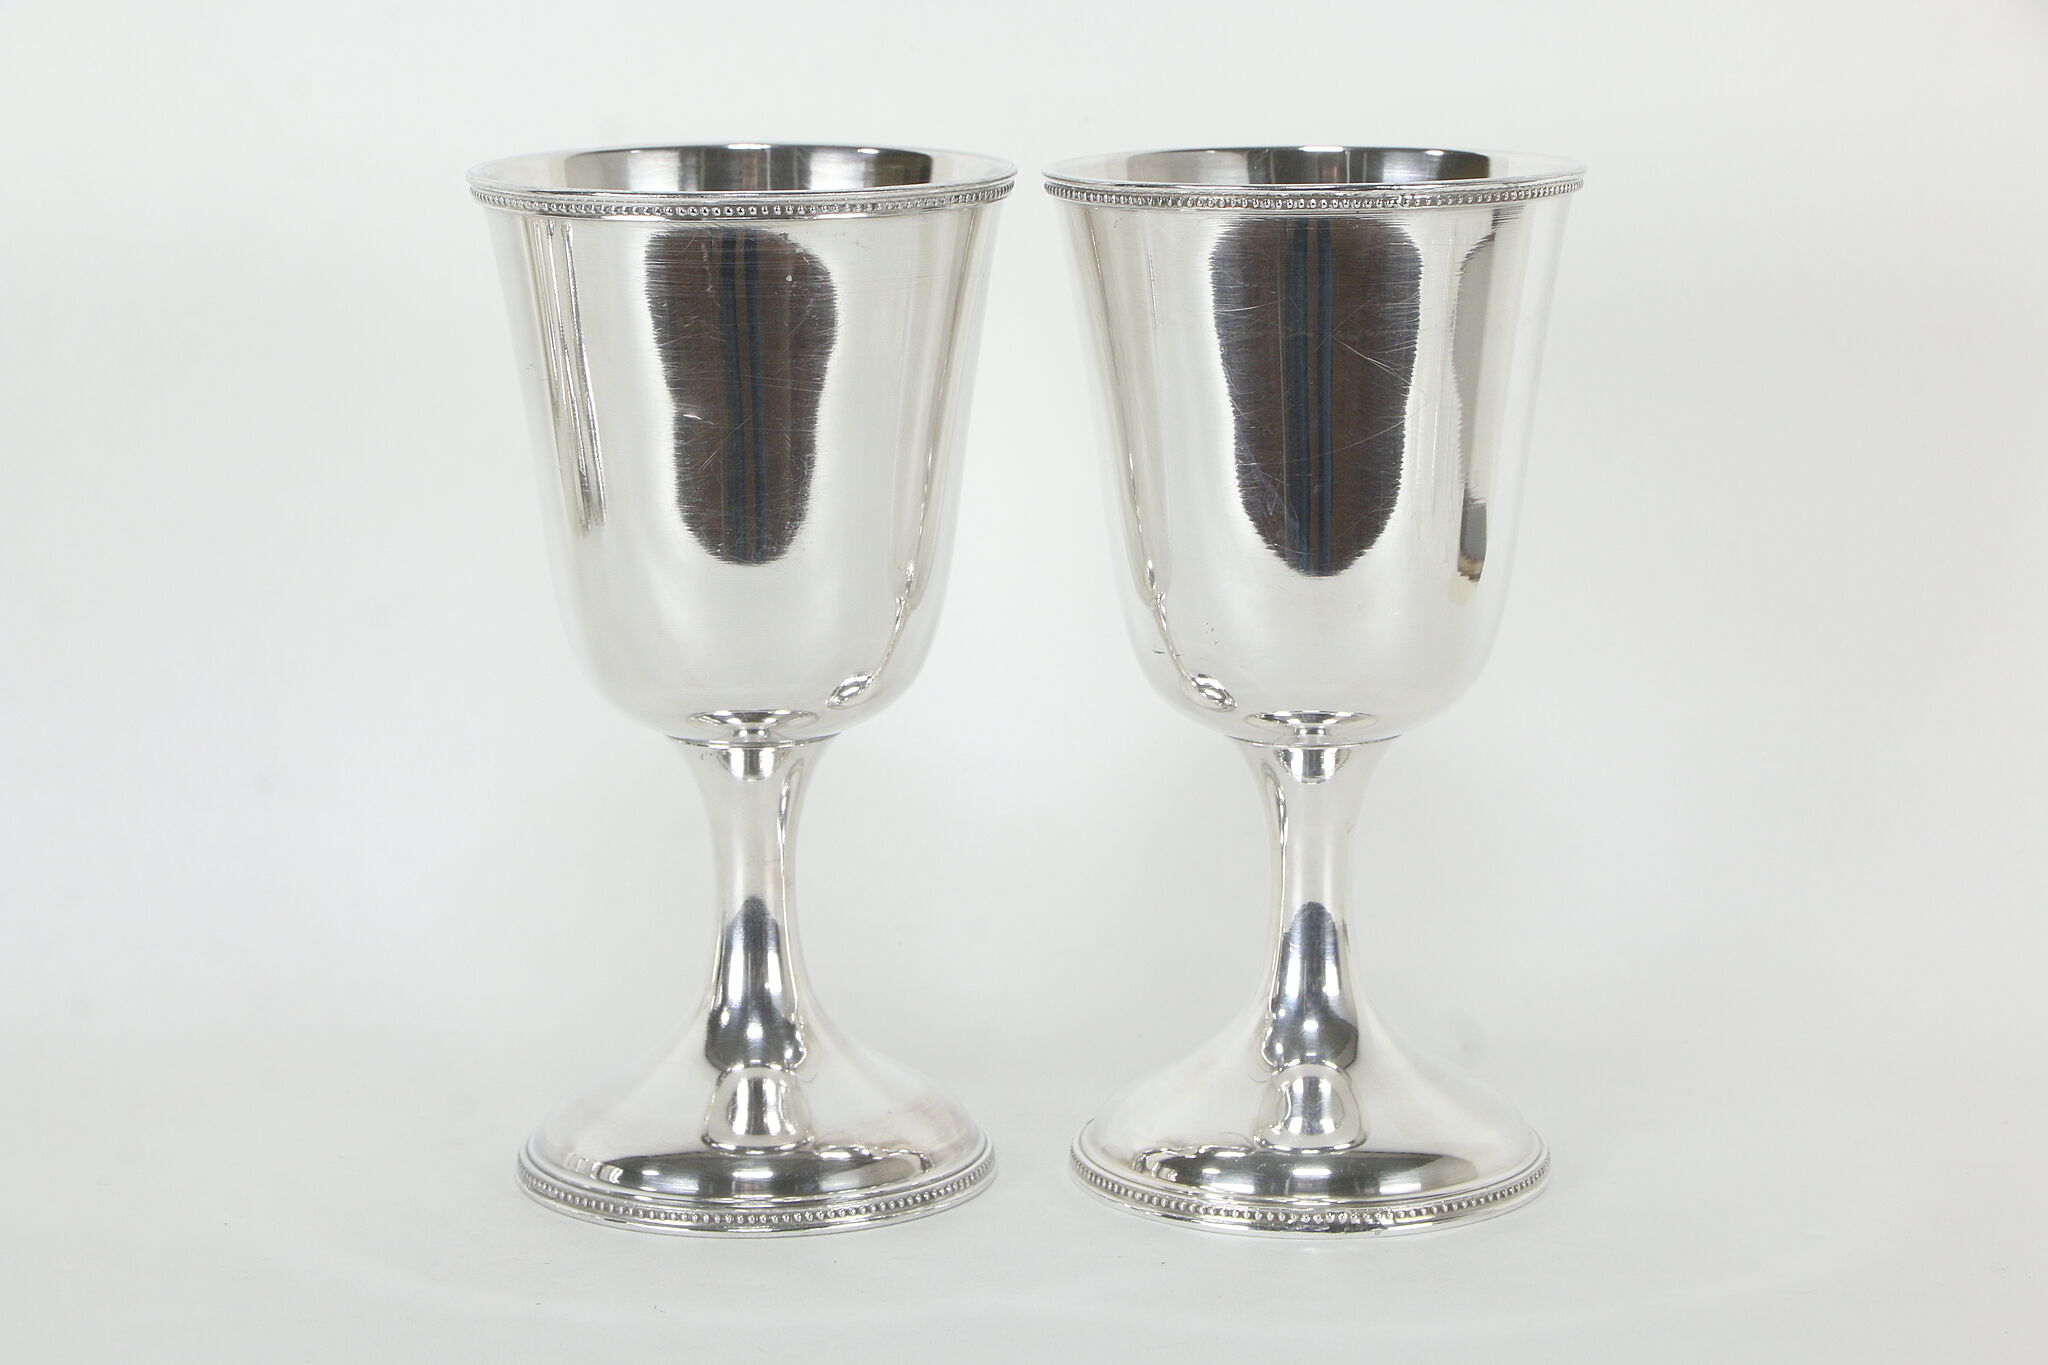 Set of 4 Antique Silverplate Goblets, Rogers Smith